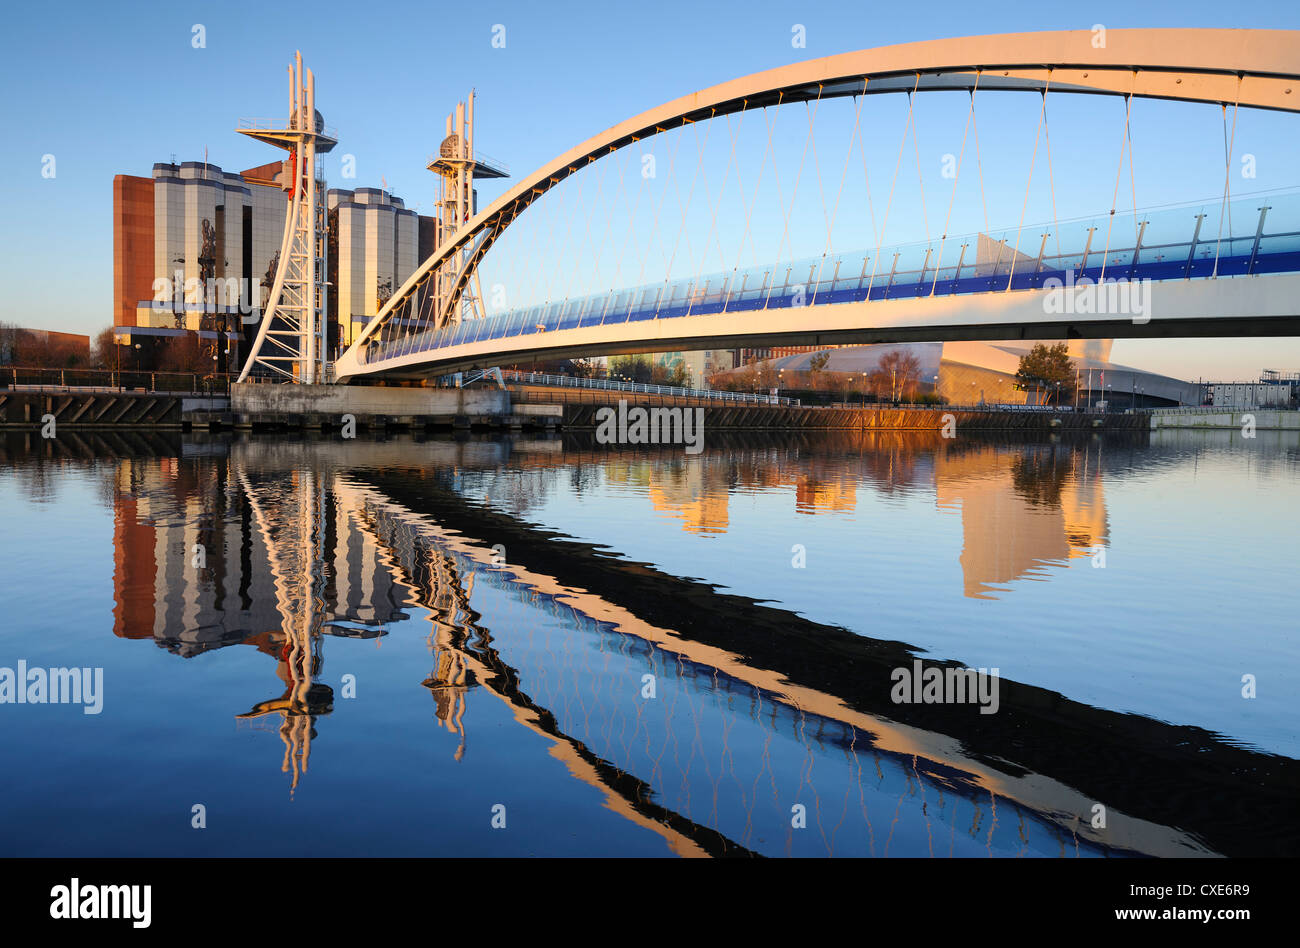 Early morning view of the Millennium Bridge, Salford Quays, Manchester, Greater Manchester, England, United Kingdom, Europe Stock Photo